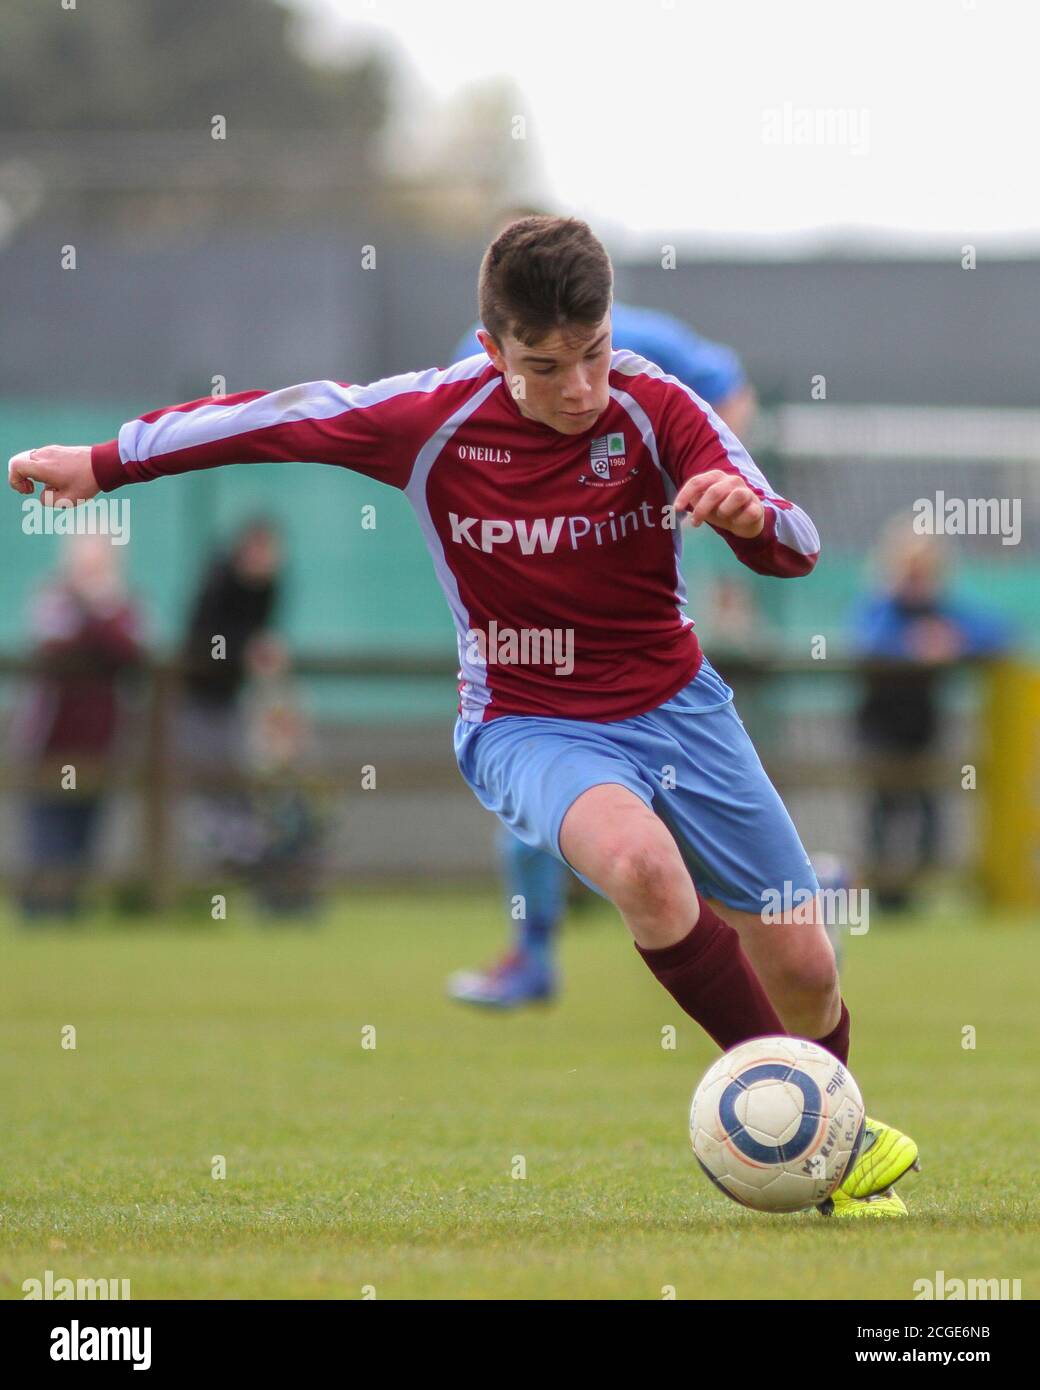 ron Connolly Of Mervue United U14 In Action Against North End United Mervue United V North End United U14 Sfai Goodson Cup Semi Final 12 4 14 Fahy S Field Mervue Galway Pictures Of A